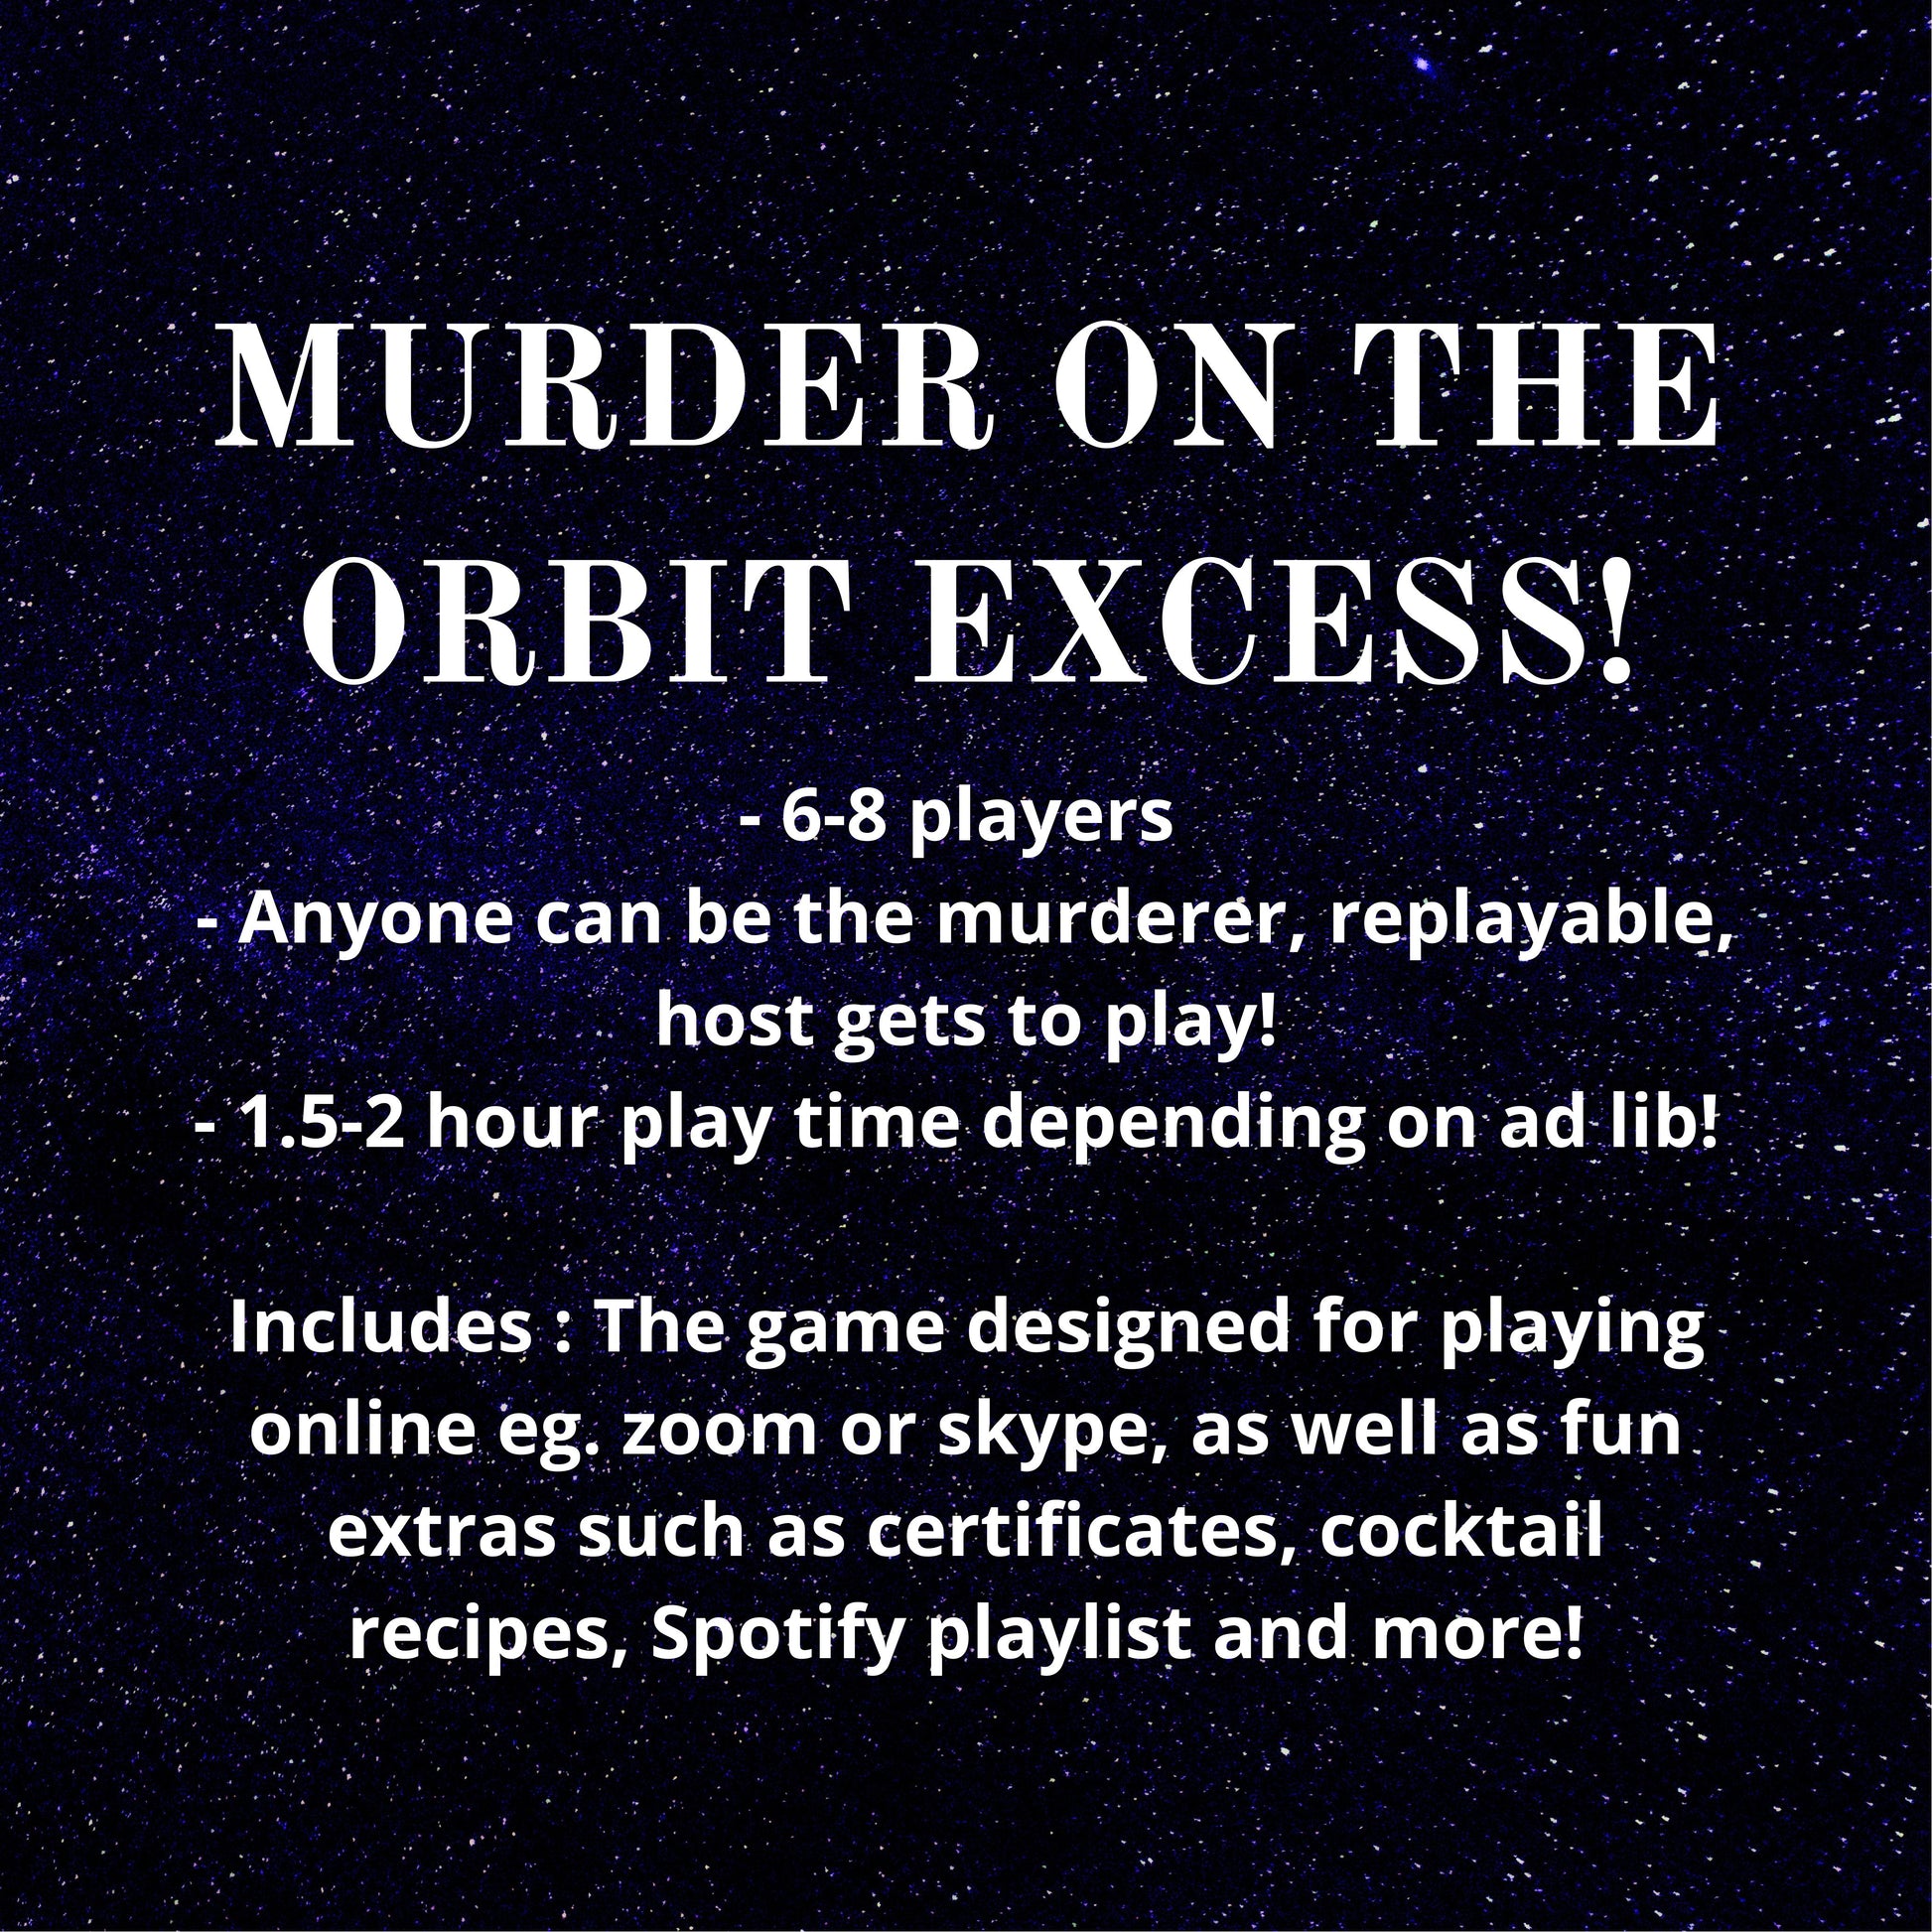 Anyone can be the murderer, replayable and the host gets to play, 1.5- 2 hours playing time